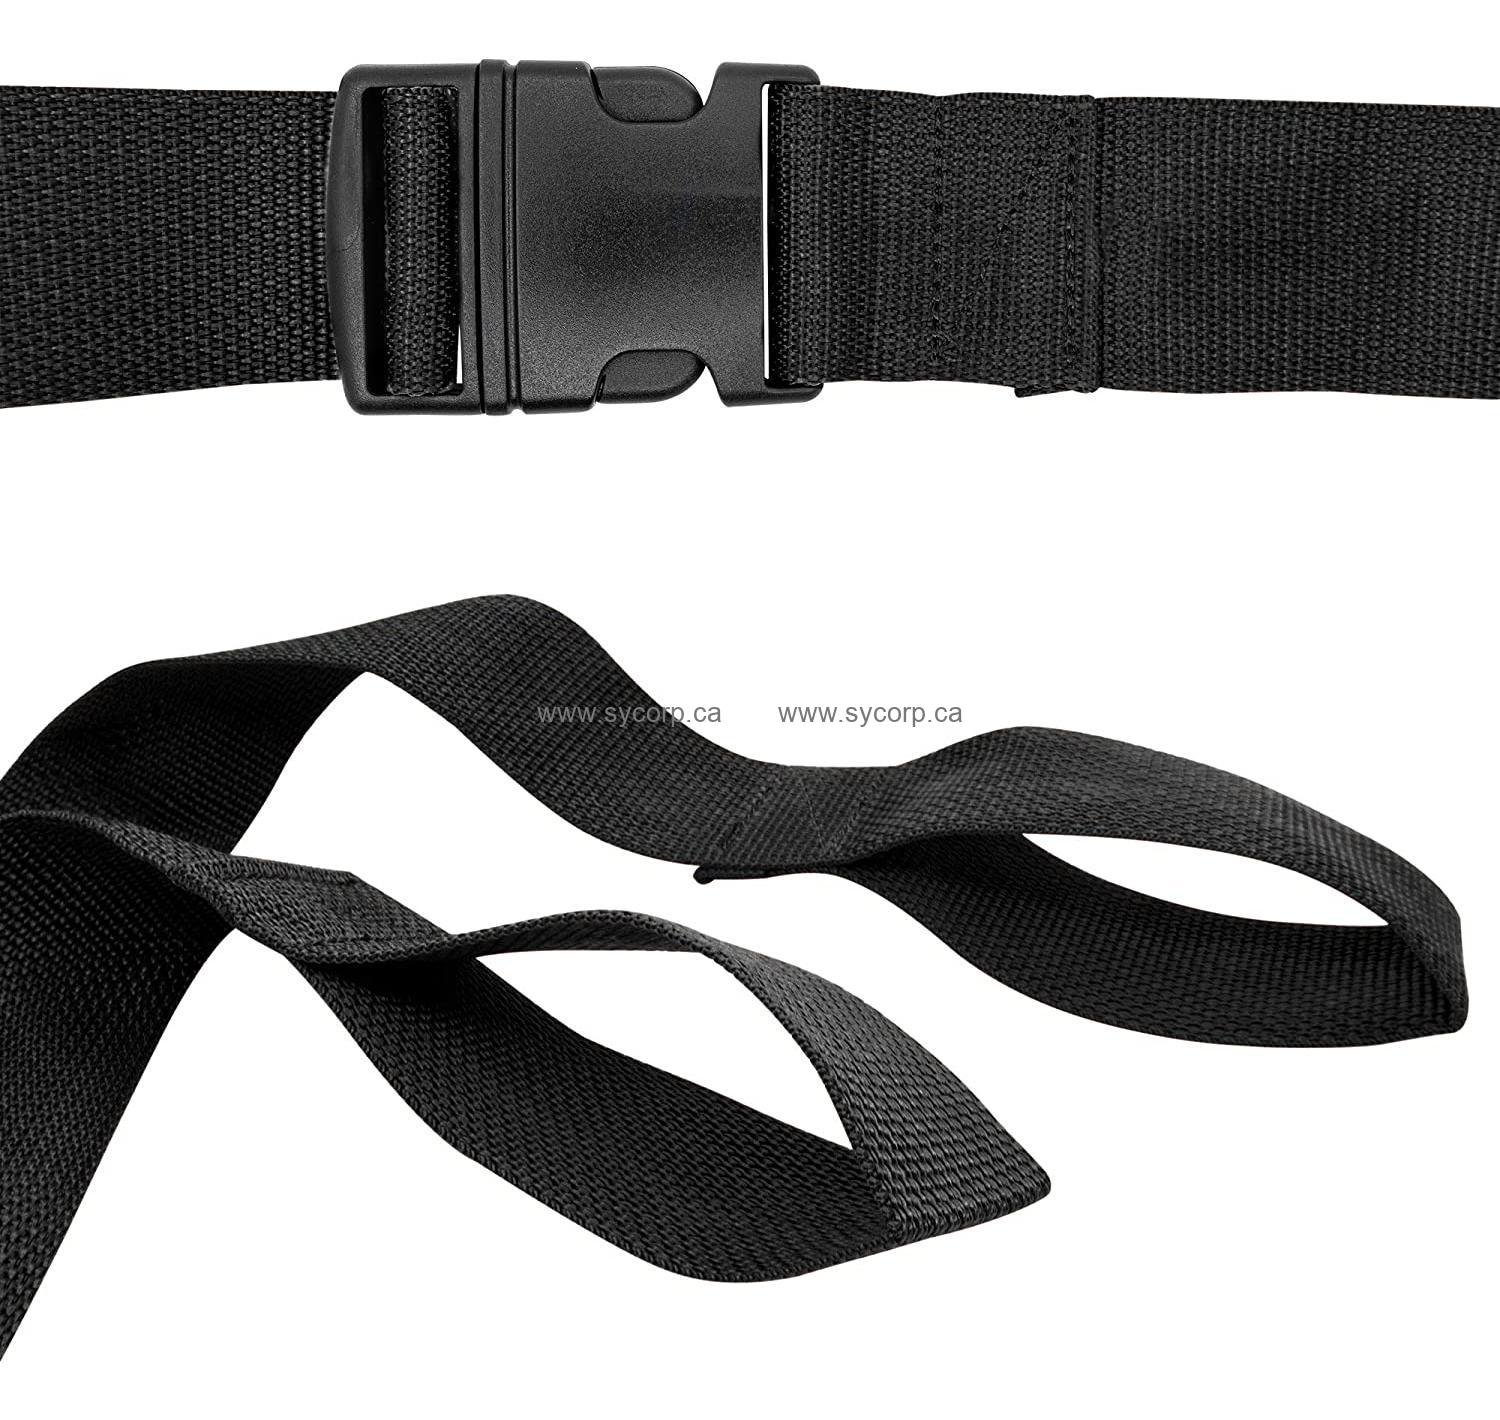 5 Foot - 2 Piece Nylon Stretcher Strap with Metal Buckle - Medical Warehouse